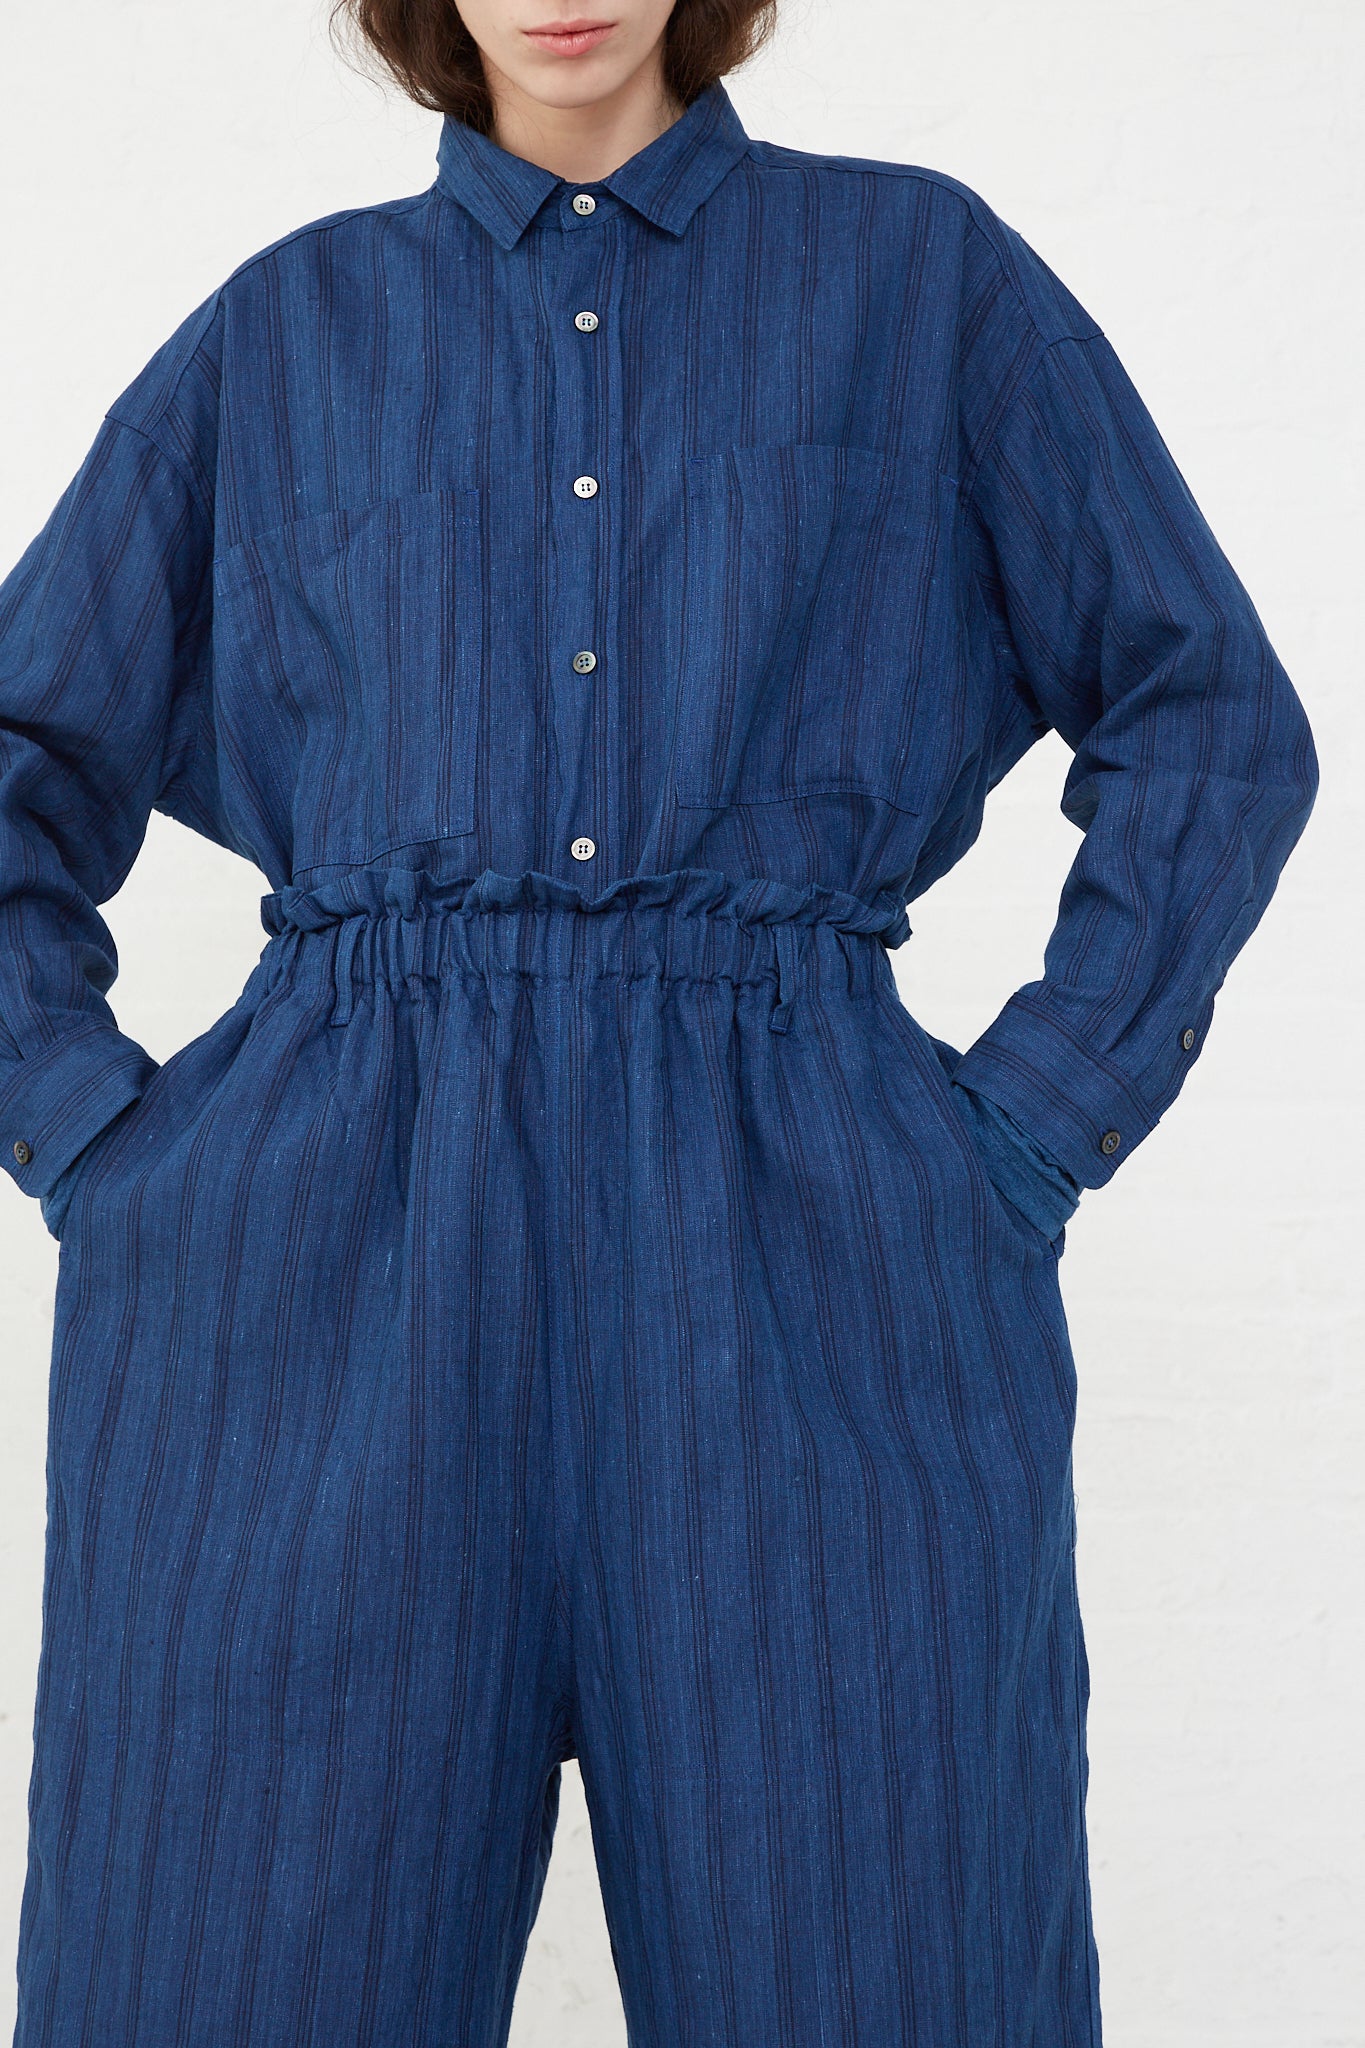 A woman wearing the Ichi Antiquités Woven Linen Pant in Indigo Stripes with an elasticated waist.